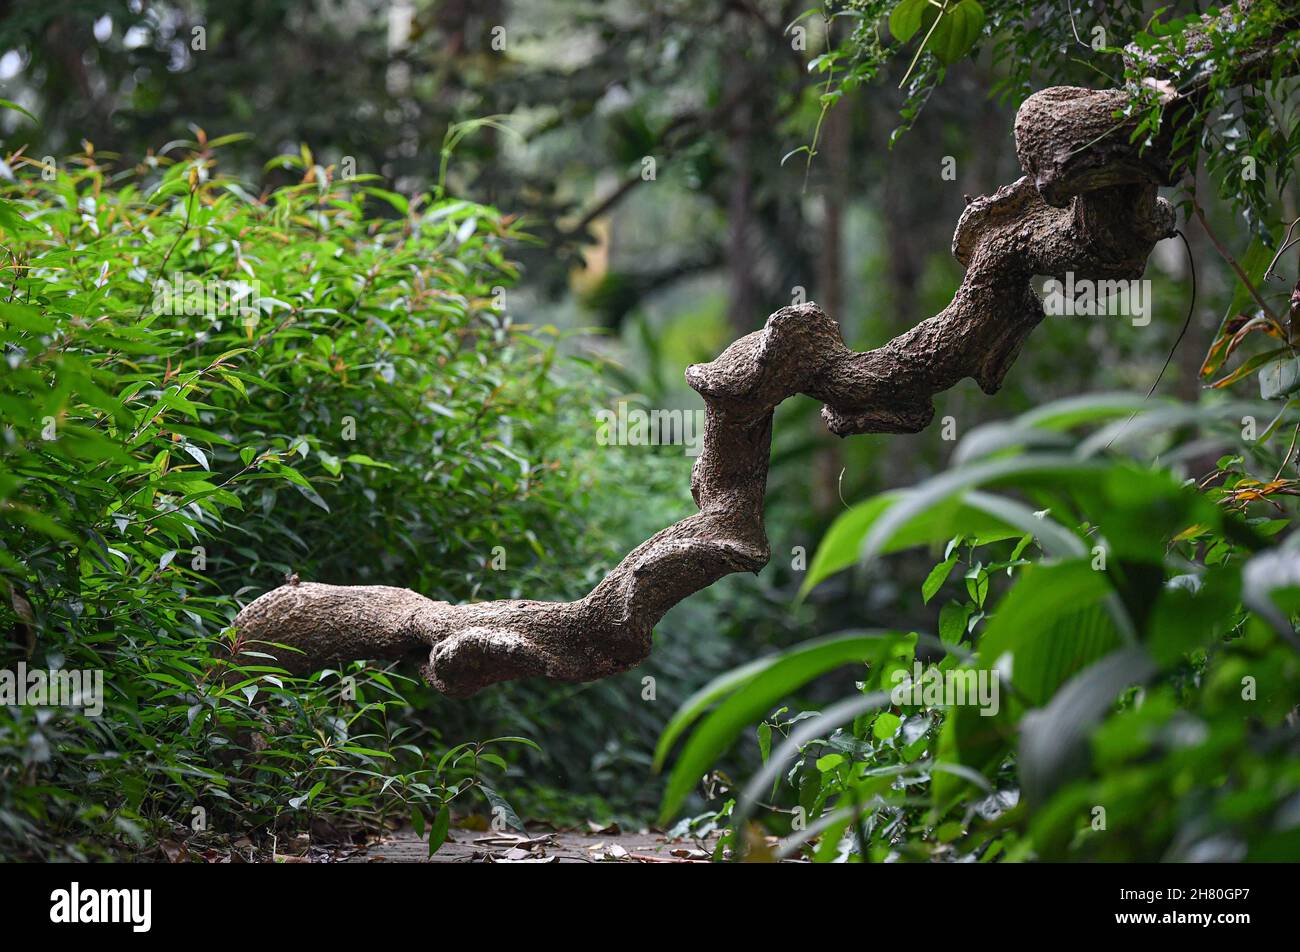 (211126) -- HAIKOU, Nov. 26, 2021 (Xinhua) -- Photo taken on Nov. 17, 2021 shows the Entada phaseoloides in Hainan Tropical Botanical Garden in Danzhou City, south China's Hainan Province. Hainan Tropical Botanical Garden, located in Danzhou of south China's Hainan, was founded in 1958 and is now affiliated with Chinese Academy of Tropical Agricultural Sciences. The garden, with over 2,600 kinds of tropical and subtropical plants collected from more than 40 countries and regions, is a treasure house of tropical plant resources including flowers, fruit trees, medicinal plants and economic plant Stock Photo